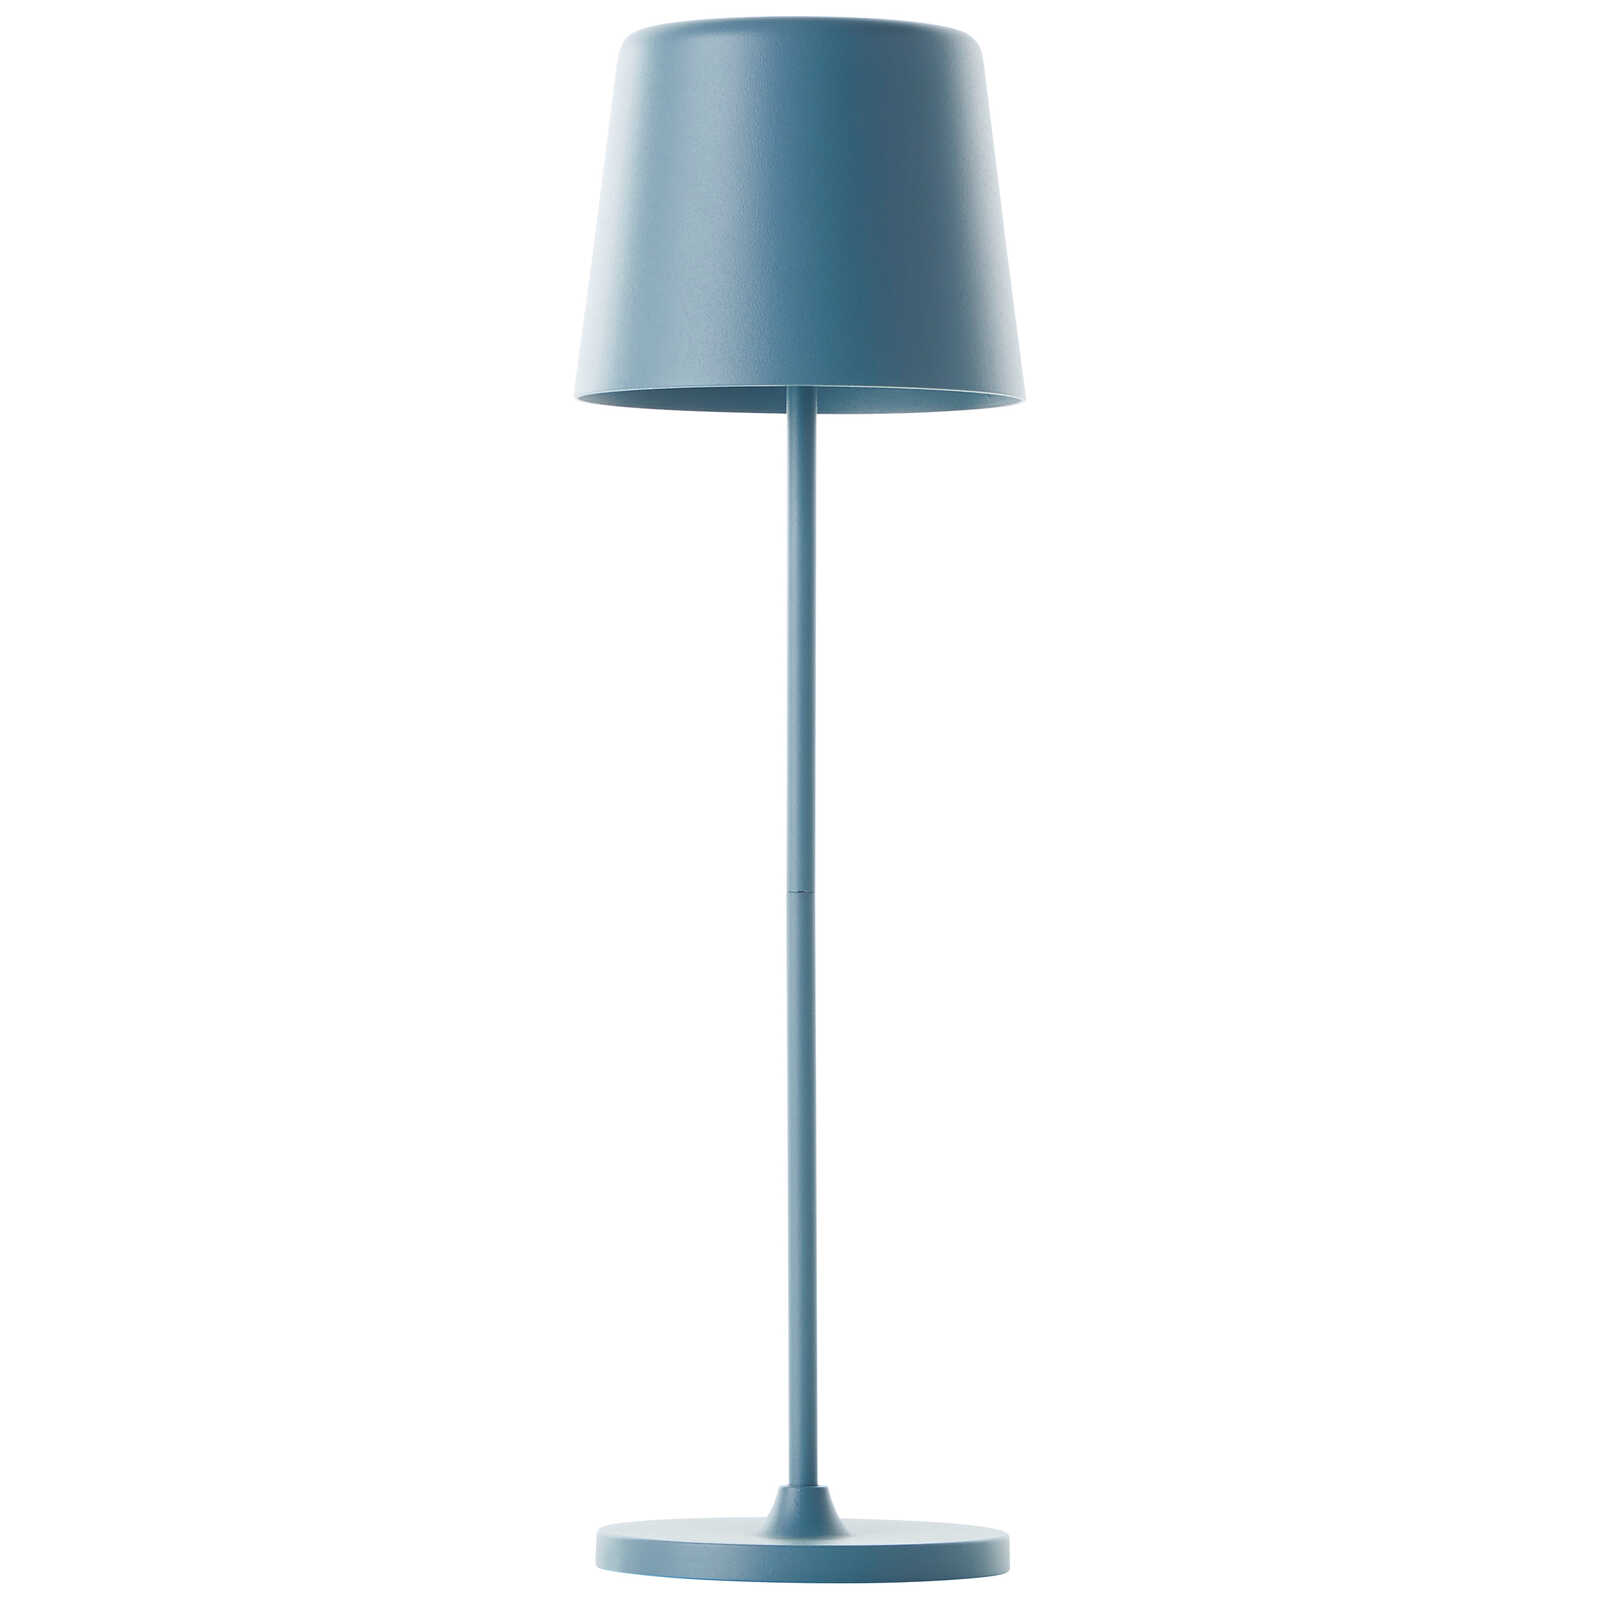             Metal table lamp - Cosy 1 - Blue
        